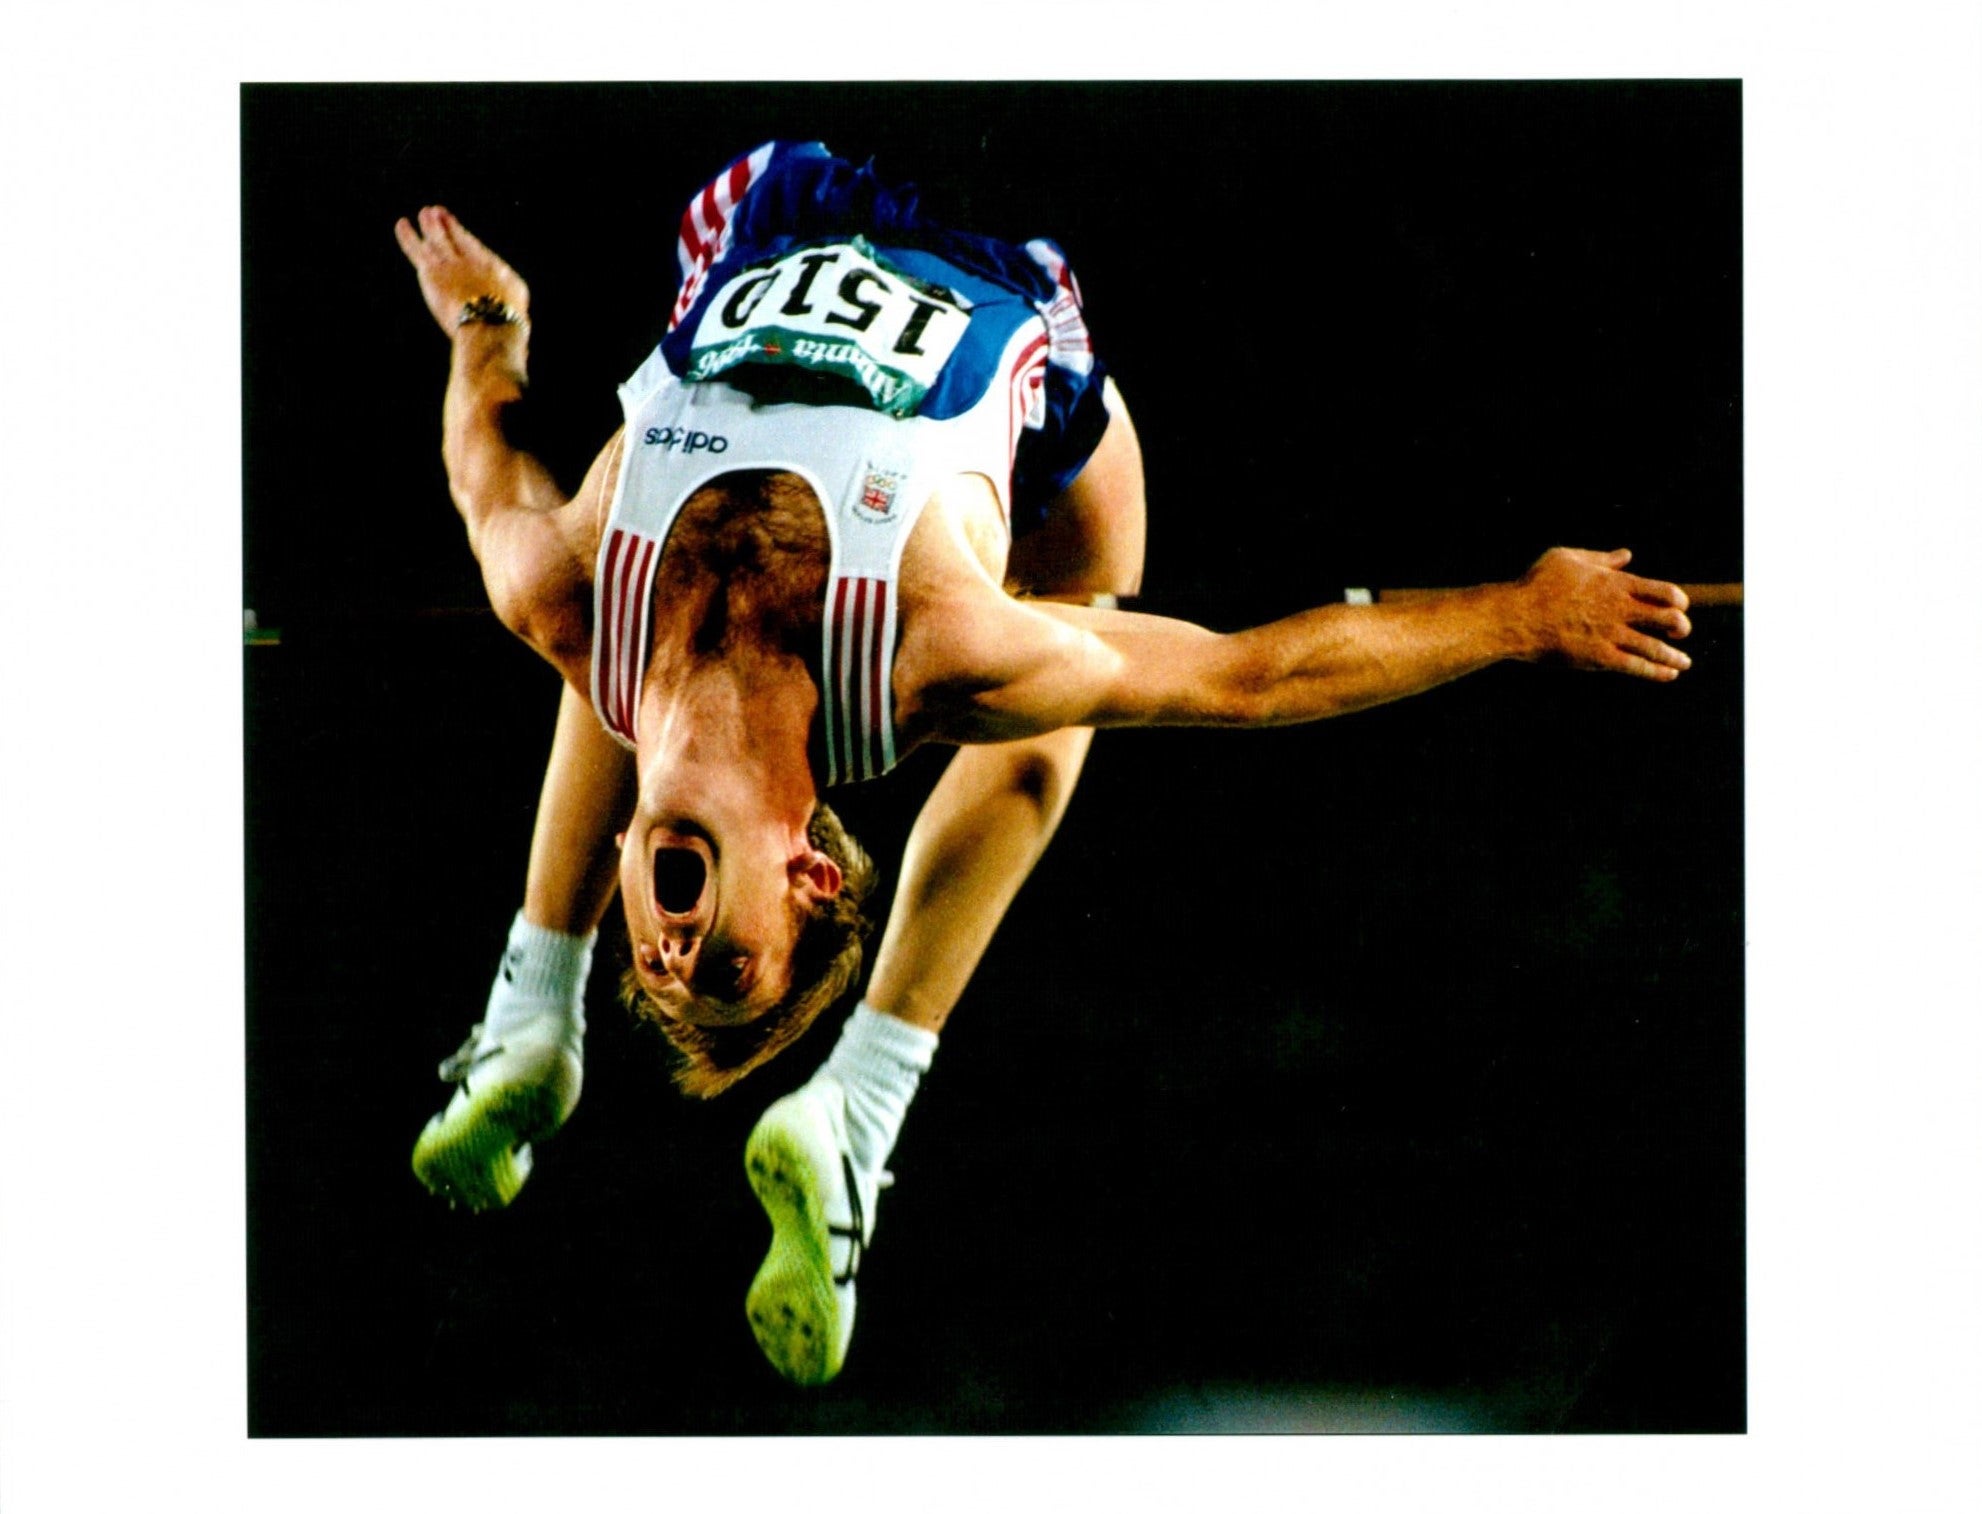 Steve Smith’s silver medal jump in Atlanta, 1996 – this particular snap was runner-up in the Nikon Press Awards category for sports photography